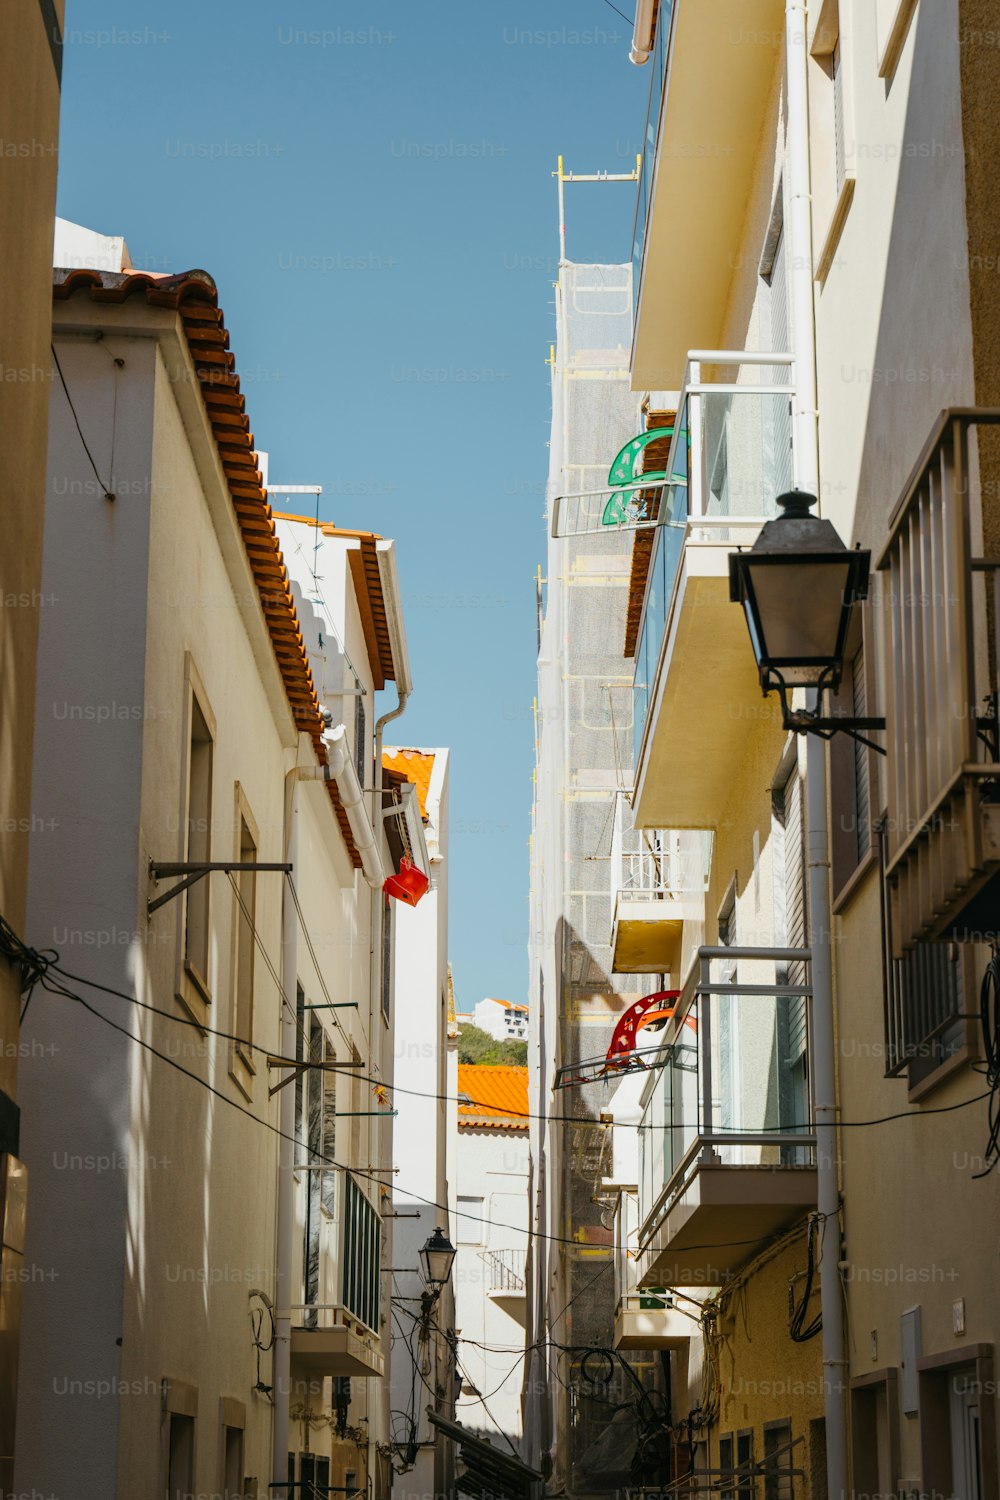 a narrow city street with buildings on both sides